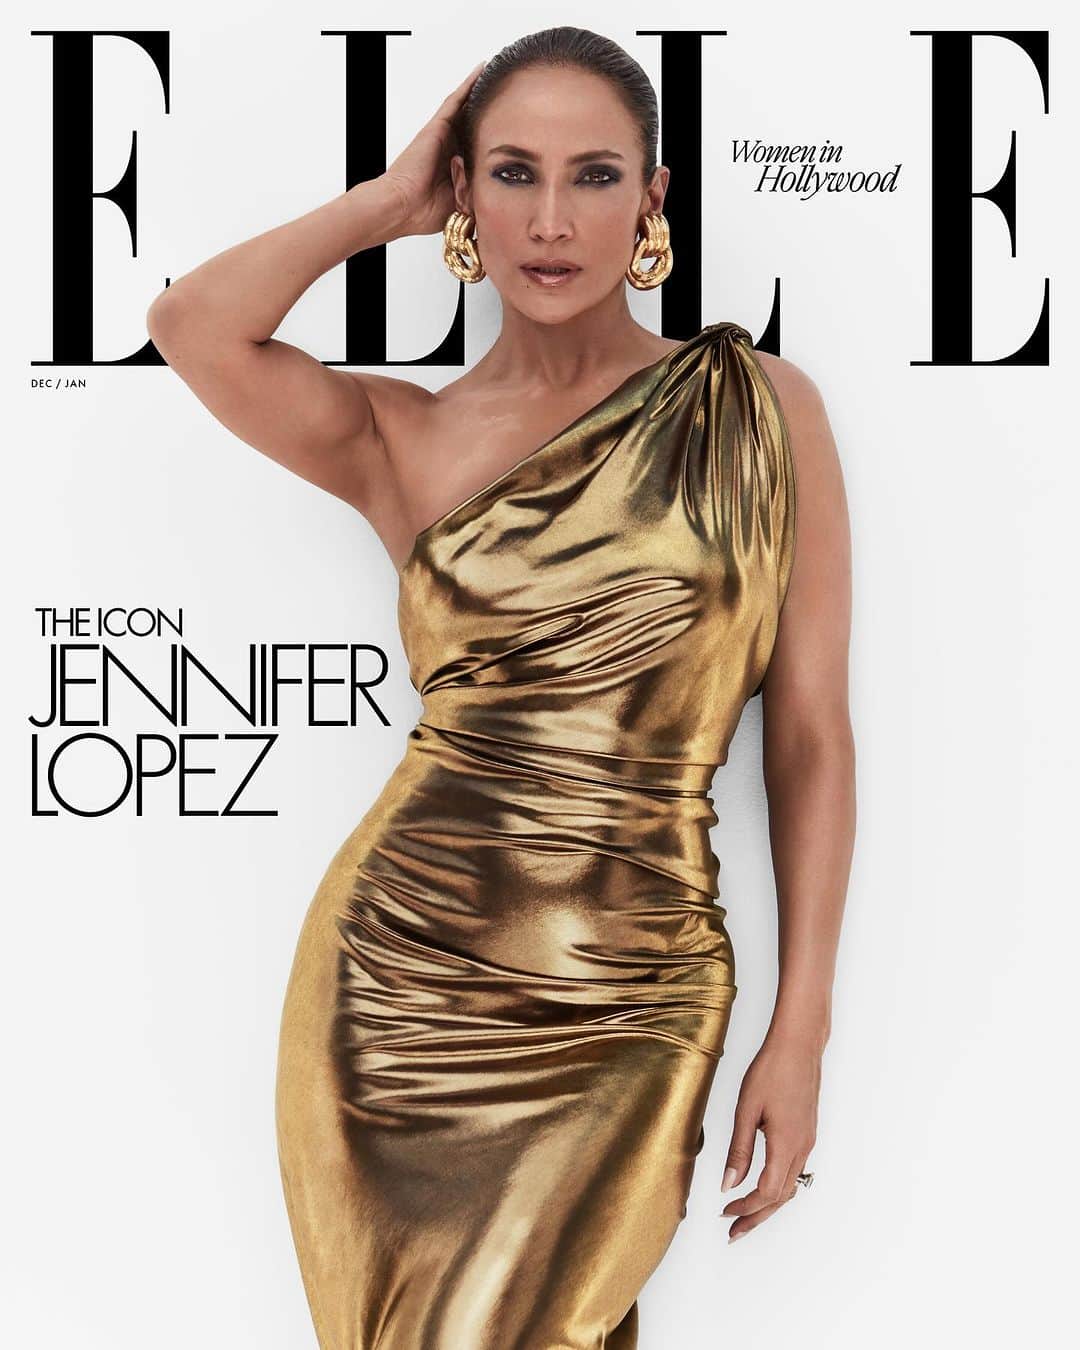 ELLE Magazineのインスタグラム：「ELLE’s Women in Hollywood are pushing boundaries. This year’s Icon award winner #JenniferLopez is out to "tell the gamut of stories" with Nuyorican Productions. #TheColorPurple’s #DanielleBrooks sees her success as being not only for herself, but for a larger collective. “That’s what I signed up for as an actor—to be a reflection of the world that I actually live in, to represent the person who doesn’t feel she has a voice and who isn’t seen,” she says. And after years of being passed over in favor of white colleagues, @ralphlauren Spotlight award recipient #GretaLee is making up for lost time. “I want the same chance as everyone else. That’s what inclusion is.”  Meet the 2023 #ELLEWIH at the link in bio. –  Our editors worked directly with the Screen Actors Guild during its recent strike to make sure we could honor women in Hollywood while still adhering to union guidelines.  ELLE: @elleusa Editor-in-Chief: Nina Garcia @ninagarcia Talent: Jennifer Lopez, Danielle Brooks, Greta Lee @jlo @daniebb3 Photographer: Sølve Sundsbø,Adrienne Raquel,Zoey Grossman @solvesundsbostudio @adrienneraquel @zoeygrossman Stylist: George Cortina,Zerina Akers,Alex White @georgecortina @zerinaakers @alexwhiteedits Writer: Véronique Hyland, Erica Gonzales, Claire Stern @niquepeeks @ericagonzo @clairecstern Hair: Jesus Guerrero at The Wall Group, Nikki Nelms for SheaMoisture, Jenny Cho at A-Frame Agency @jesushair @thewallgroup @nikkinelms @sheamoisture @jennychohair @aframe_agency Makeup: Scott Barnes at Six K, Rebekah Aladdin for Dior, Kara Yoshimoto Bua for Chanel @scottbarnescosmetics @sixkla @rebekahaladdin @diorbeauty @karayoshimotobua @chanel.beauty Manicure: Tom Bachik for Tweezerman, Temeka Jackson at A-Frame Agency, Ashlie Johnson at The Wall Group @tombachik @tweezerman, @customtnails1 @aframe_agency @ashlie_johnson @thewallgroup Production: Dana Brockman at Viewfinders, Anthony Federici at Petty Cash Production, Lola Production @dbrock324 @viewfindersnyla @thesaintsalome @petty_cash_production @lolaproduction Set design: Din Morris, Bryan Porter at Owl and the Elephant @din_morris  Set: Kelly Infield @kellys_phone On location: The Hollywood Roosevelt @thehollywoodroosevelt」